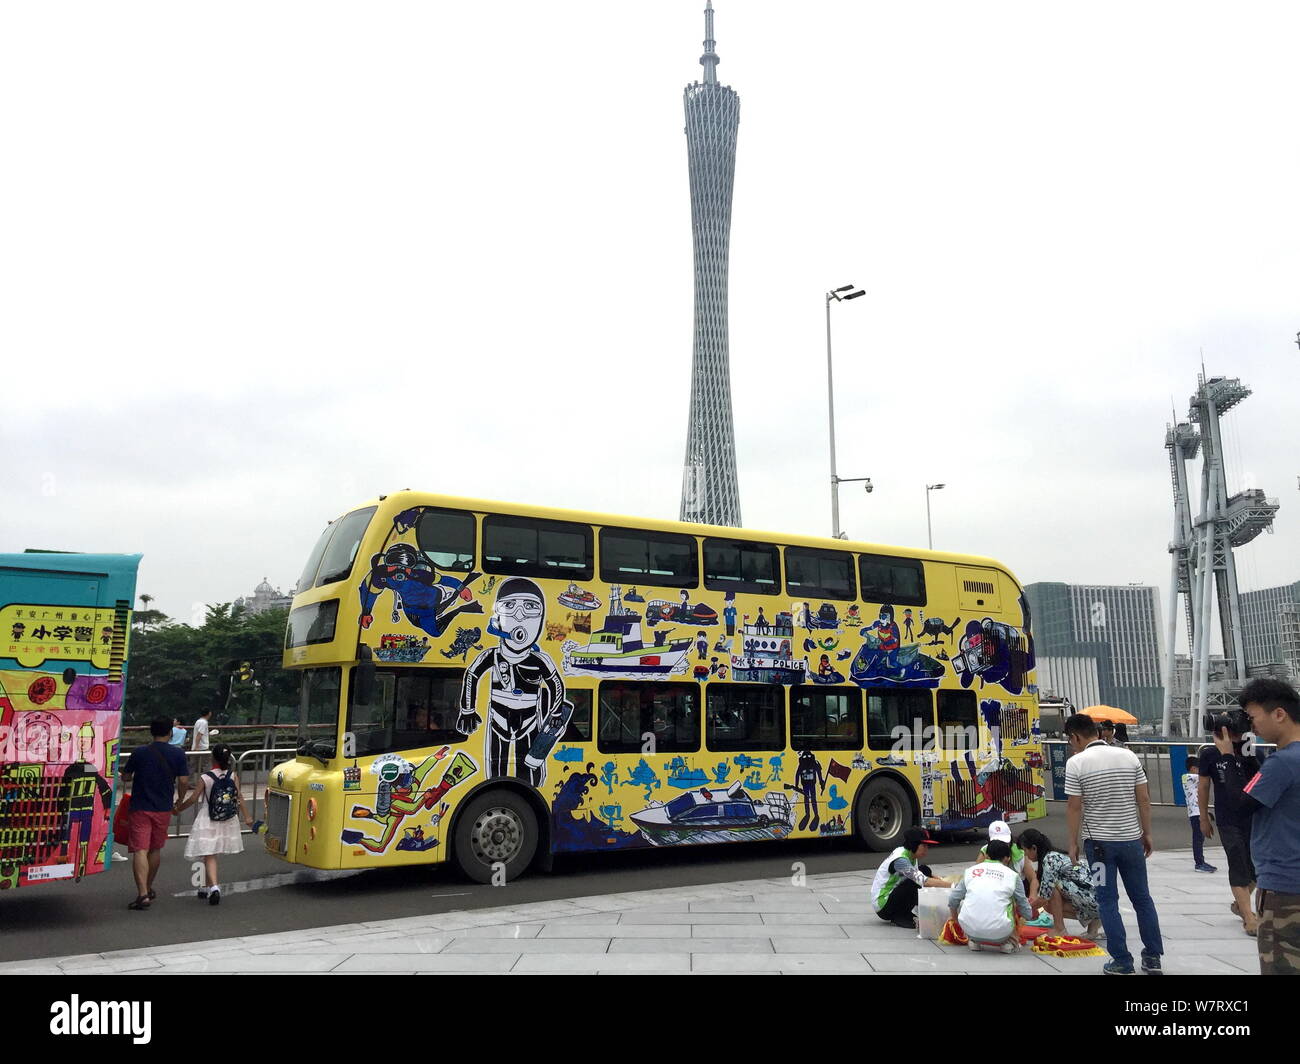 Locals look at a police-themed bus painted by 75 children ahead of the International Children's Day in Guangzhou city, south China's Guangdong provinc Stock Photo